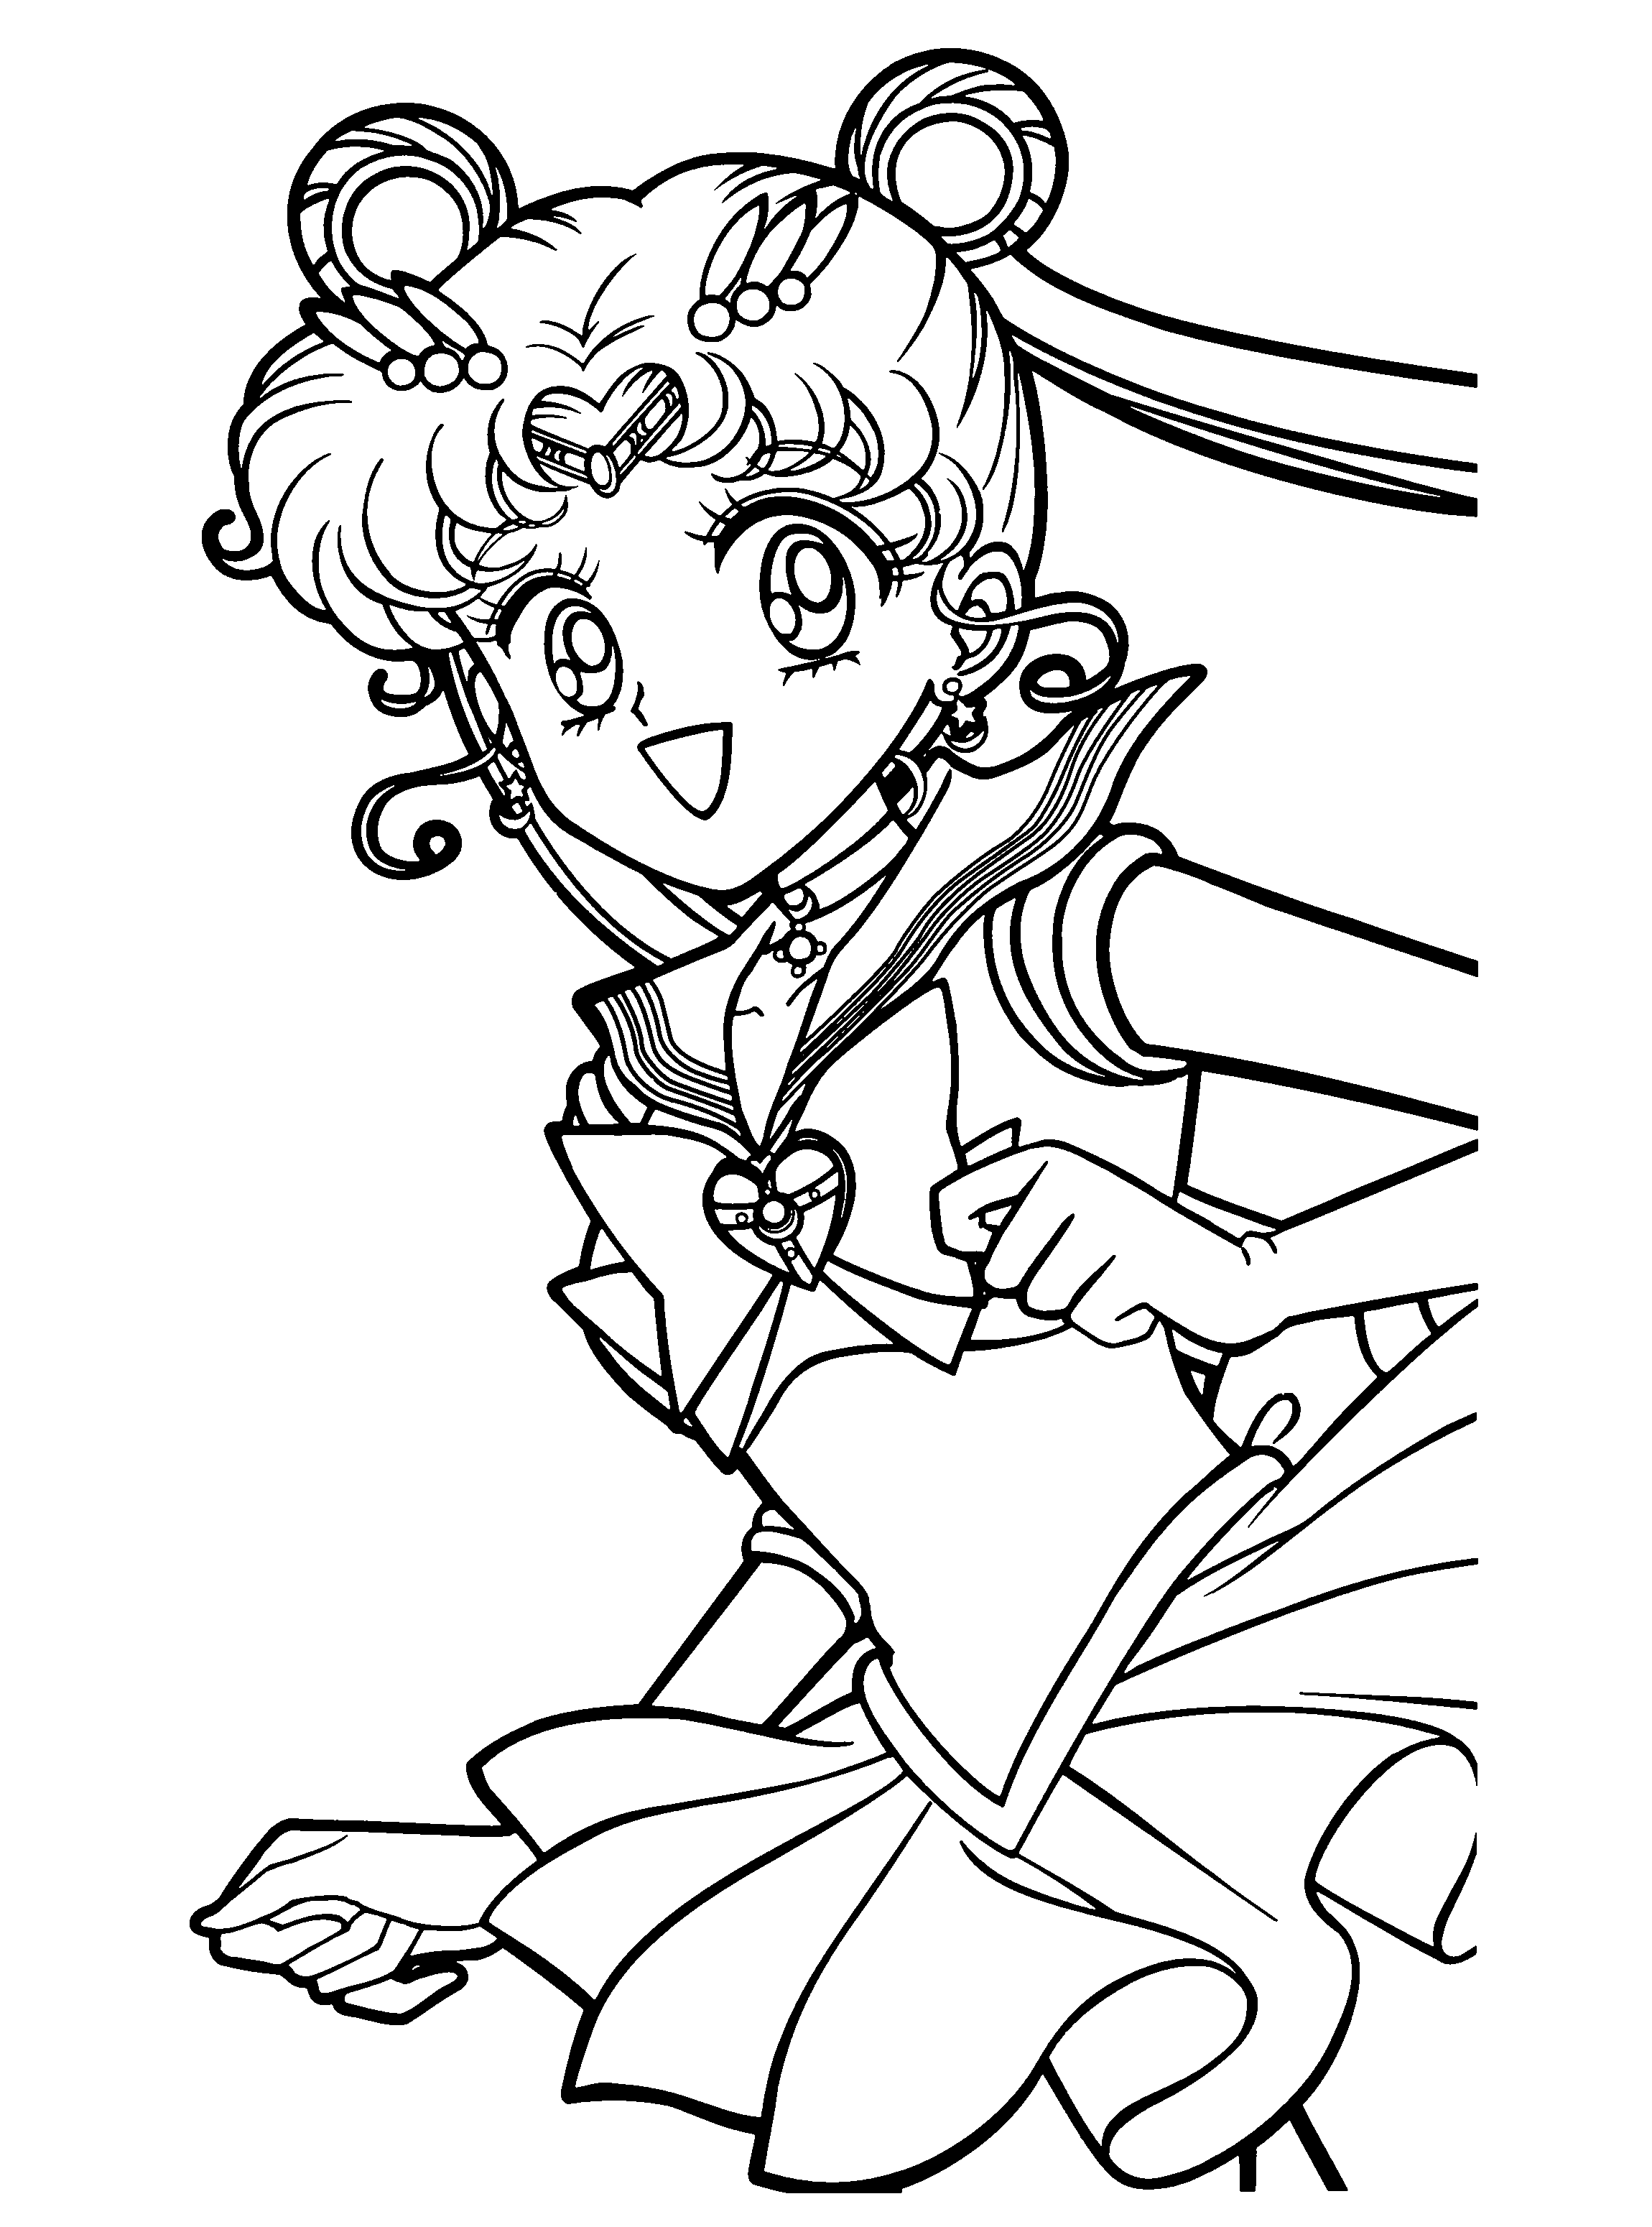 animated-coloring-pages-sailor-moon-image-0055